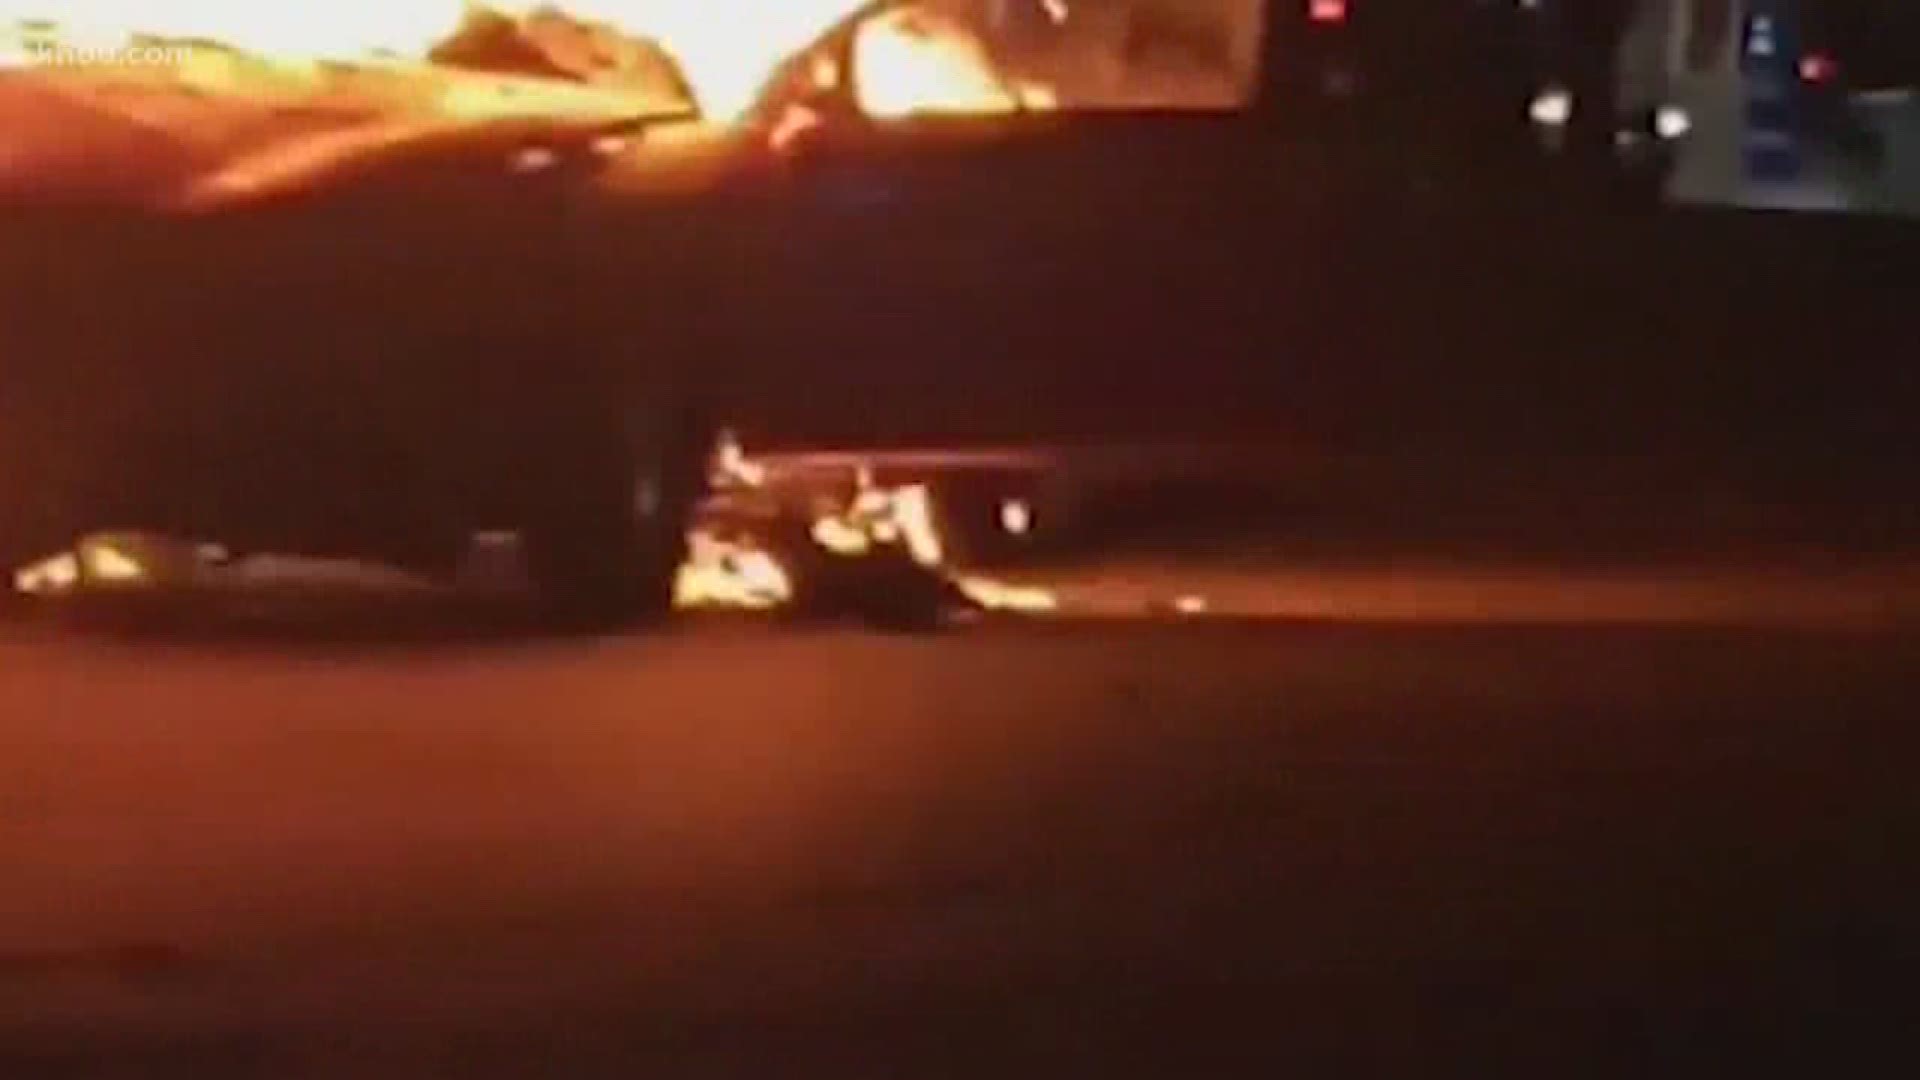 Two good Samaritans are credited with helping save the life of a man who was caught in a burning car overnight.